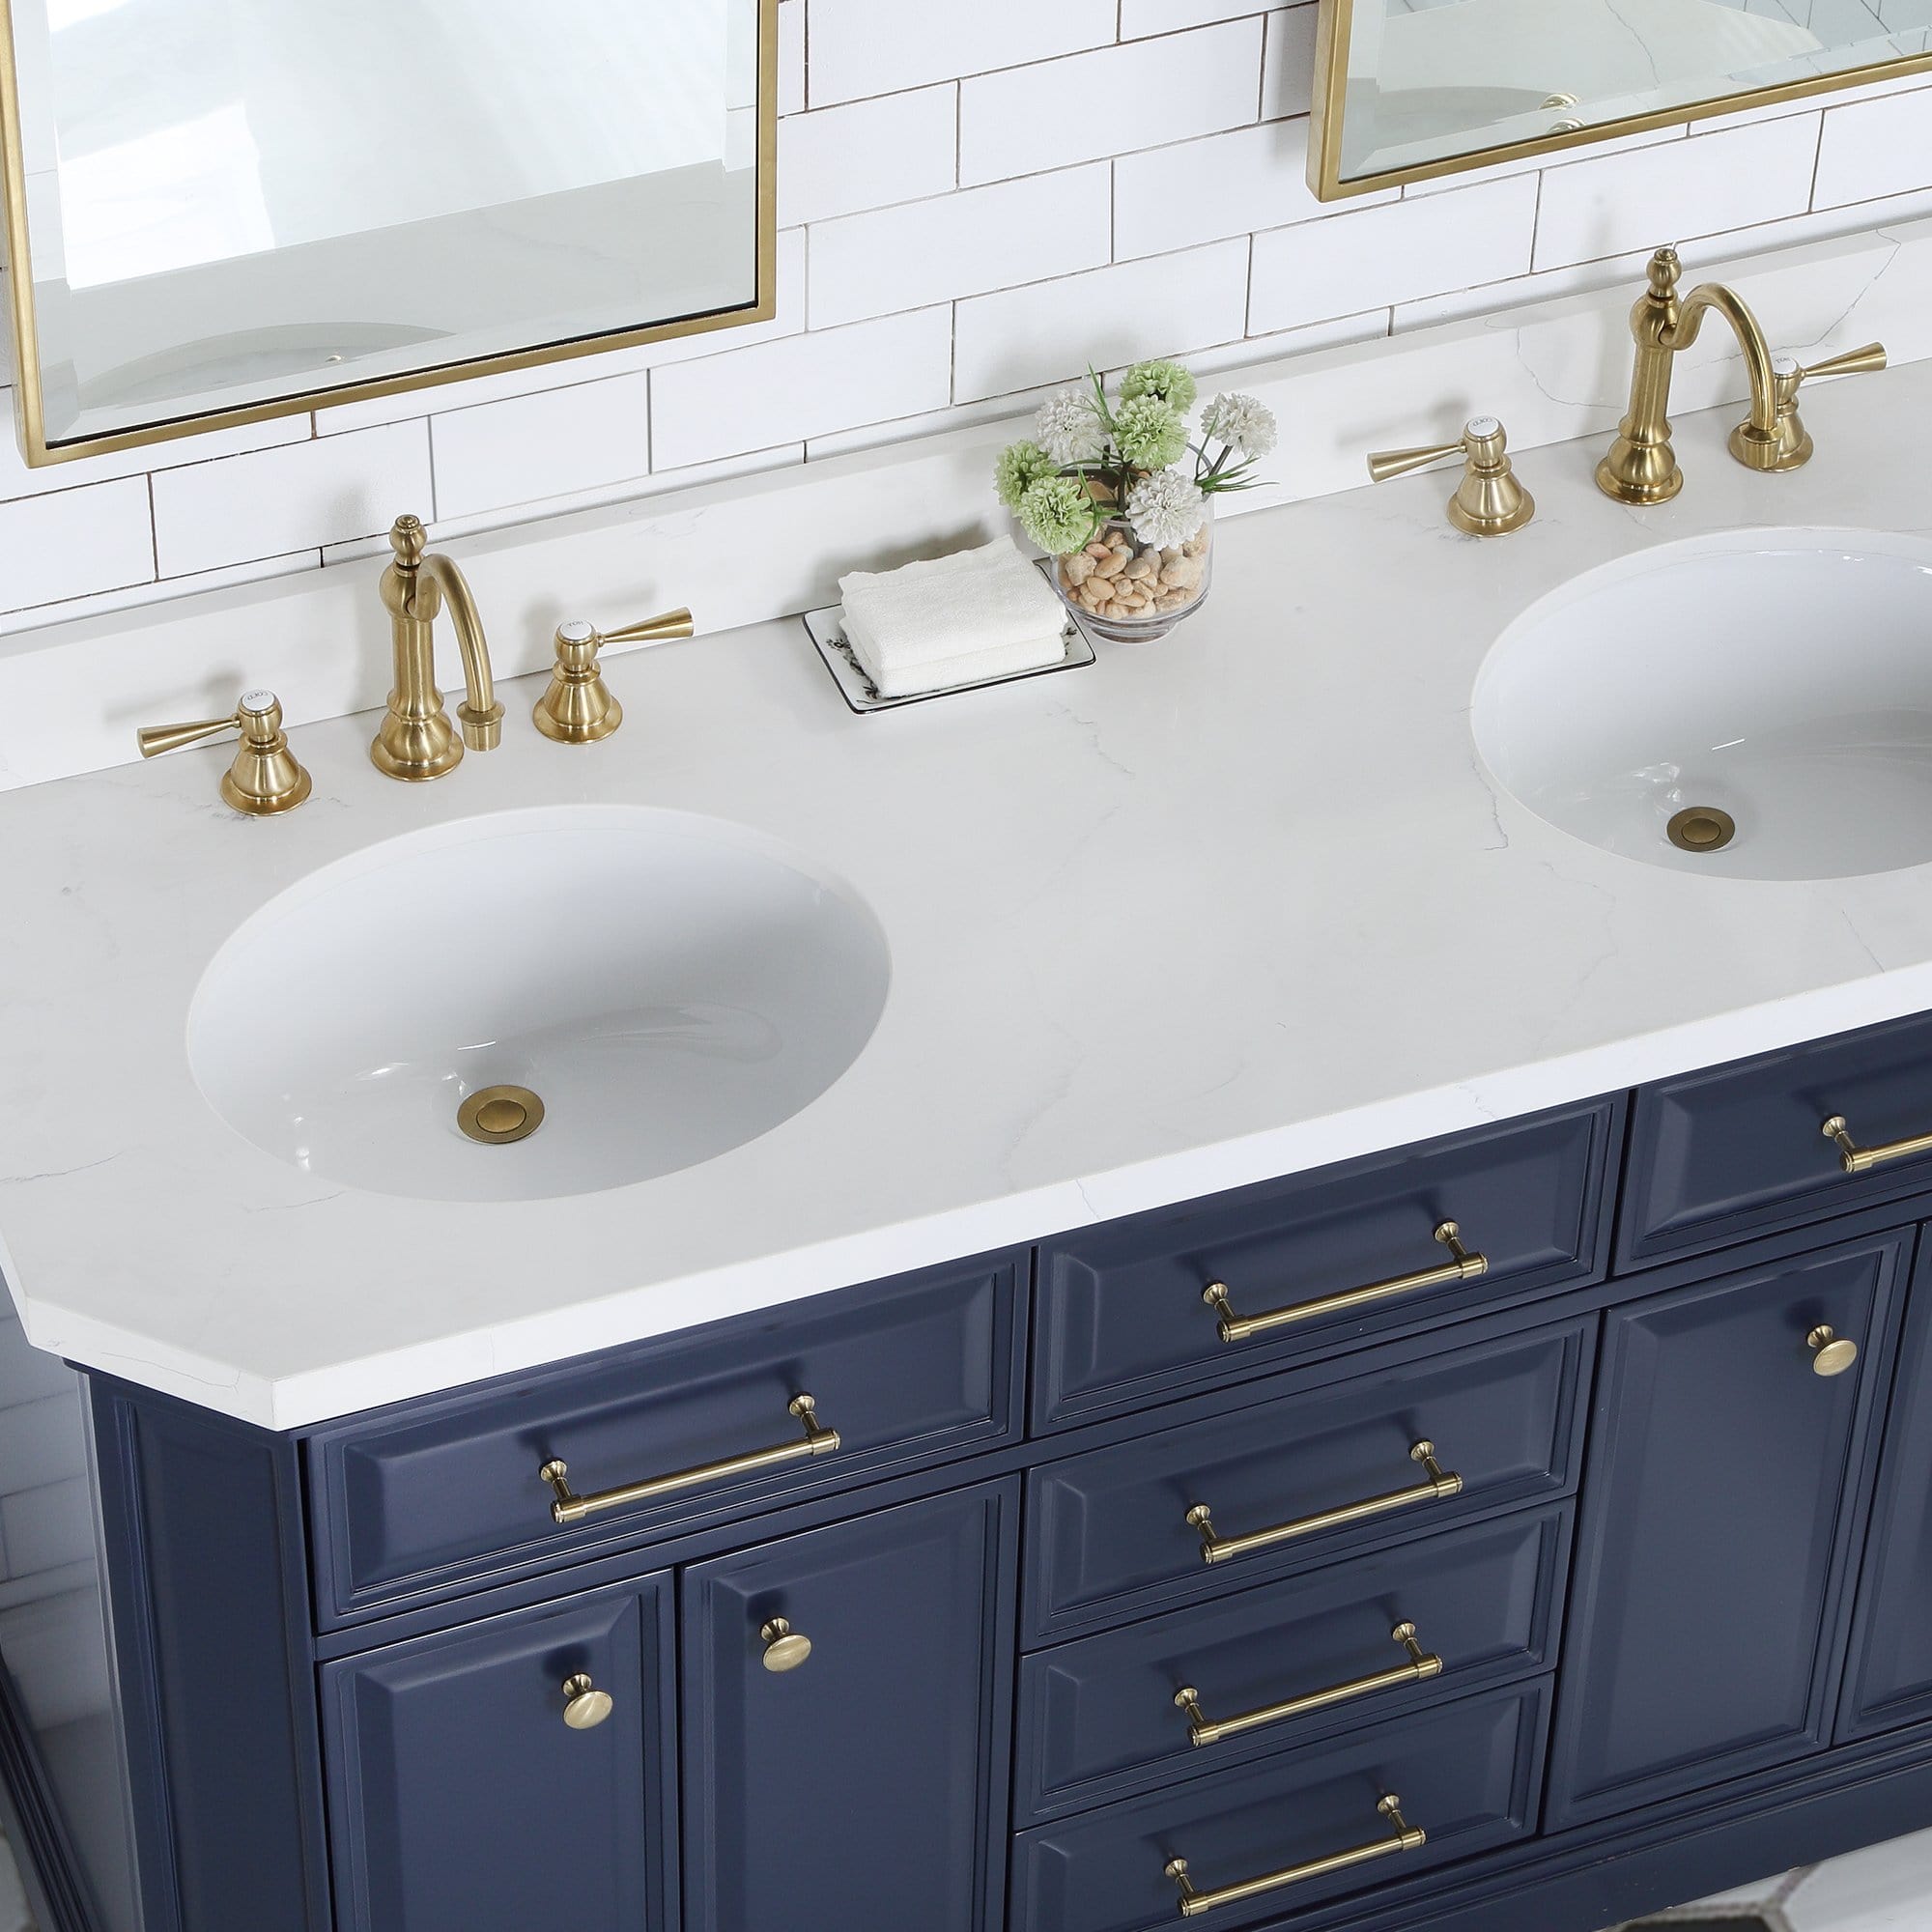 Water Creation Palace 60 In. Double Sink White Quartz Countertop Vanity in Monarch Blue with HookFaucets and Mirrors - Molaix732030765016Bathroom vanityPA60QZ06MB-E18TL1206